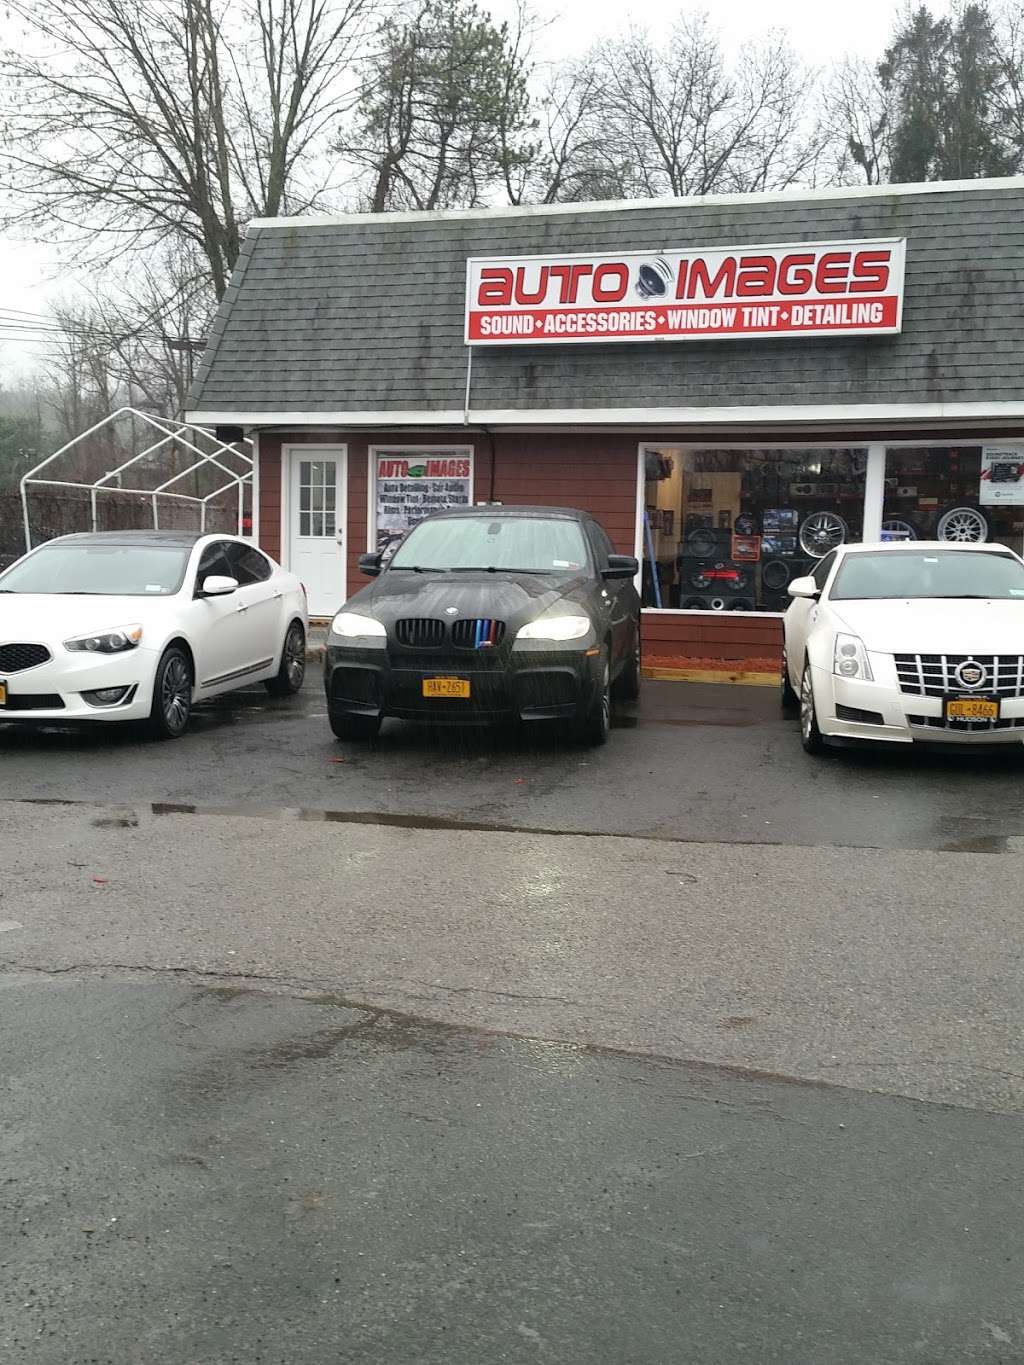 Auto Images | 3889 Crompond Rd, Cortlandt, NY 10567, USA | Phone: (914) 743-1447